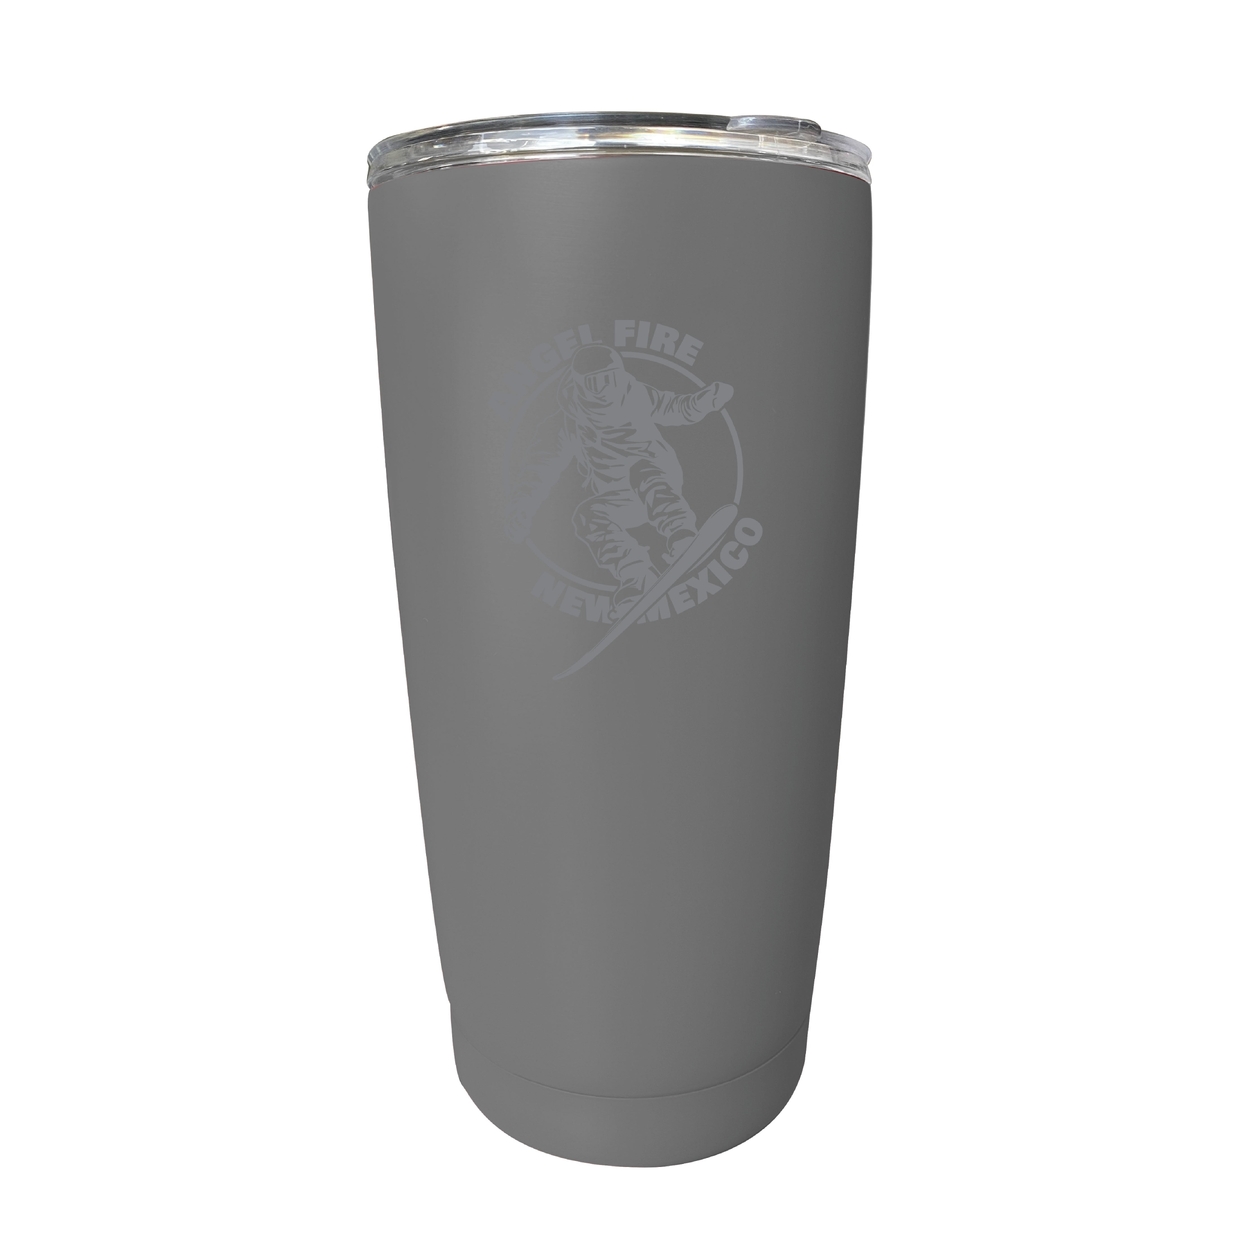 Angel Fire New Mexico Souvenir 16 Oz Engraved Stainless Steel Insulated Tumbler - Gray,,4-Pack